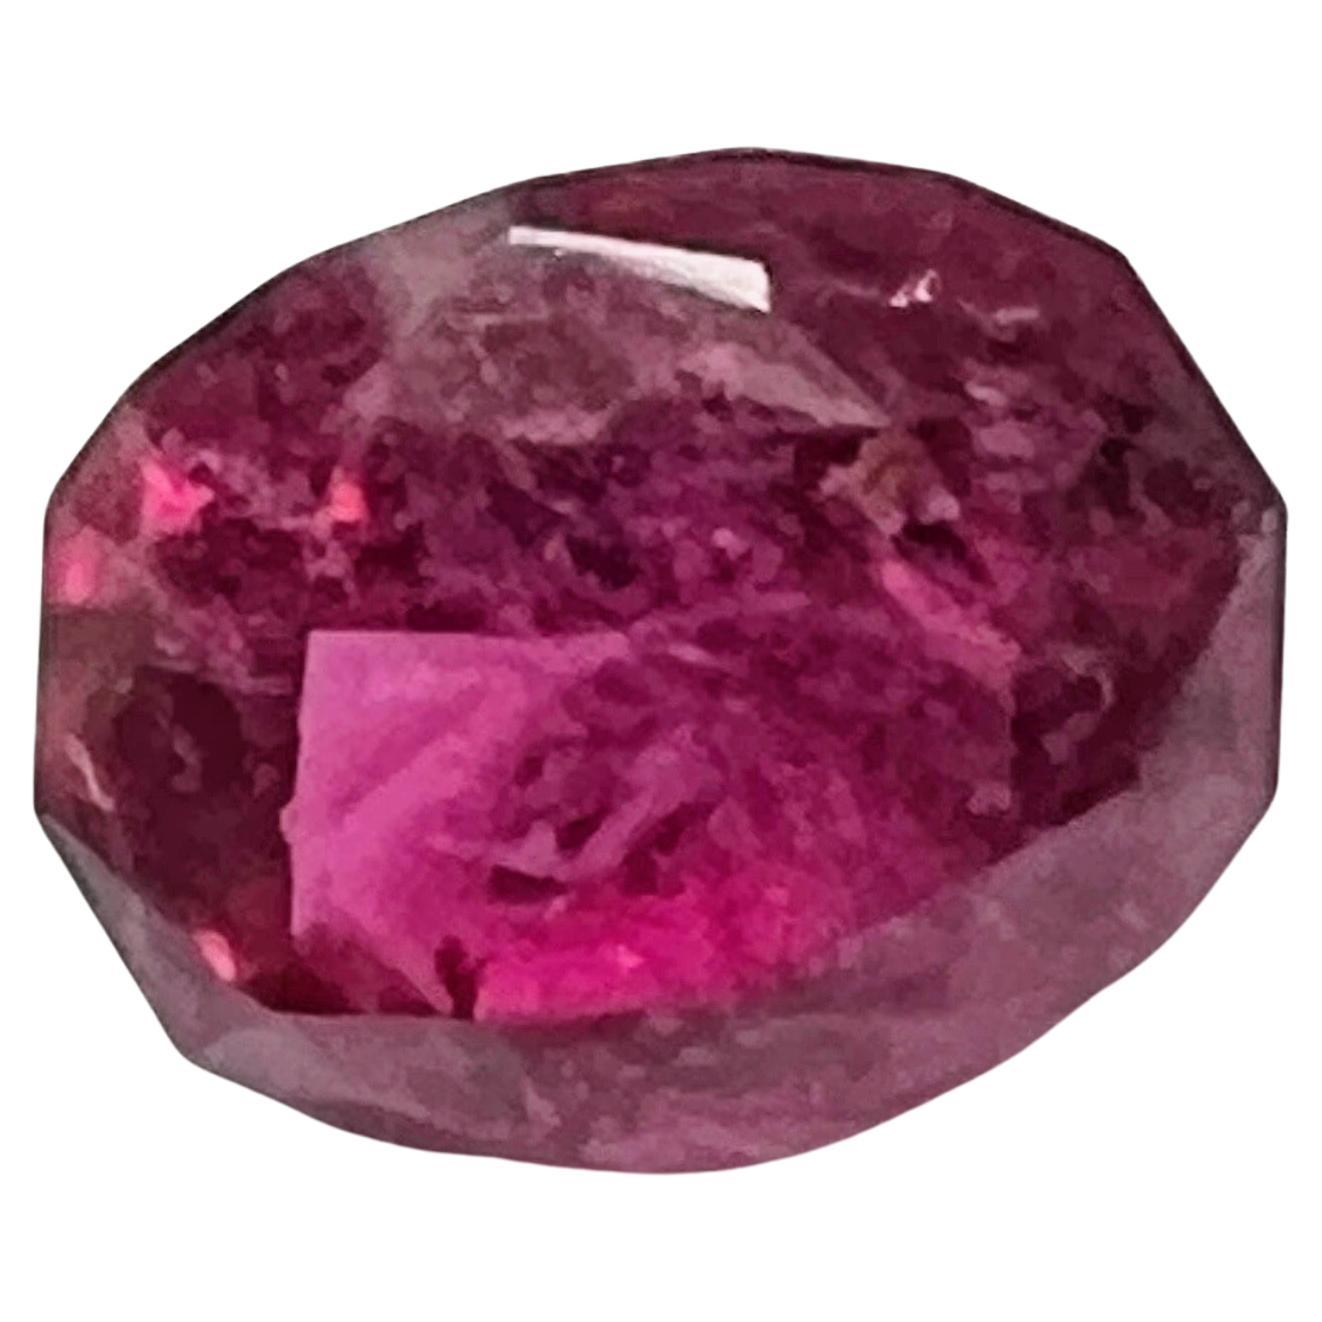 NO RESERVE 3.80ct PINK Oval Rubellite Gemstone For Sale